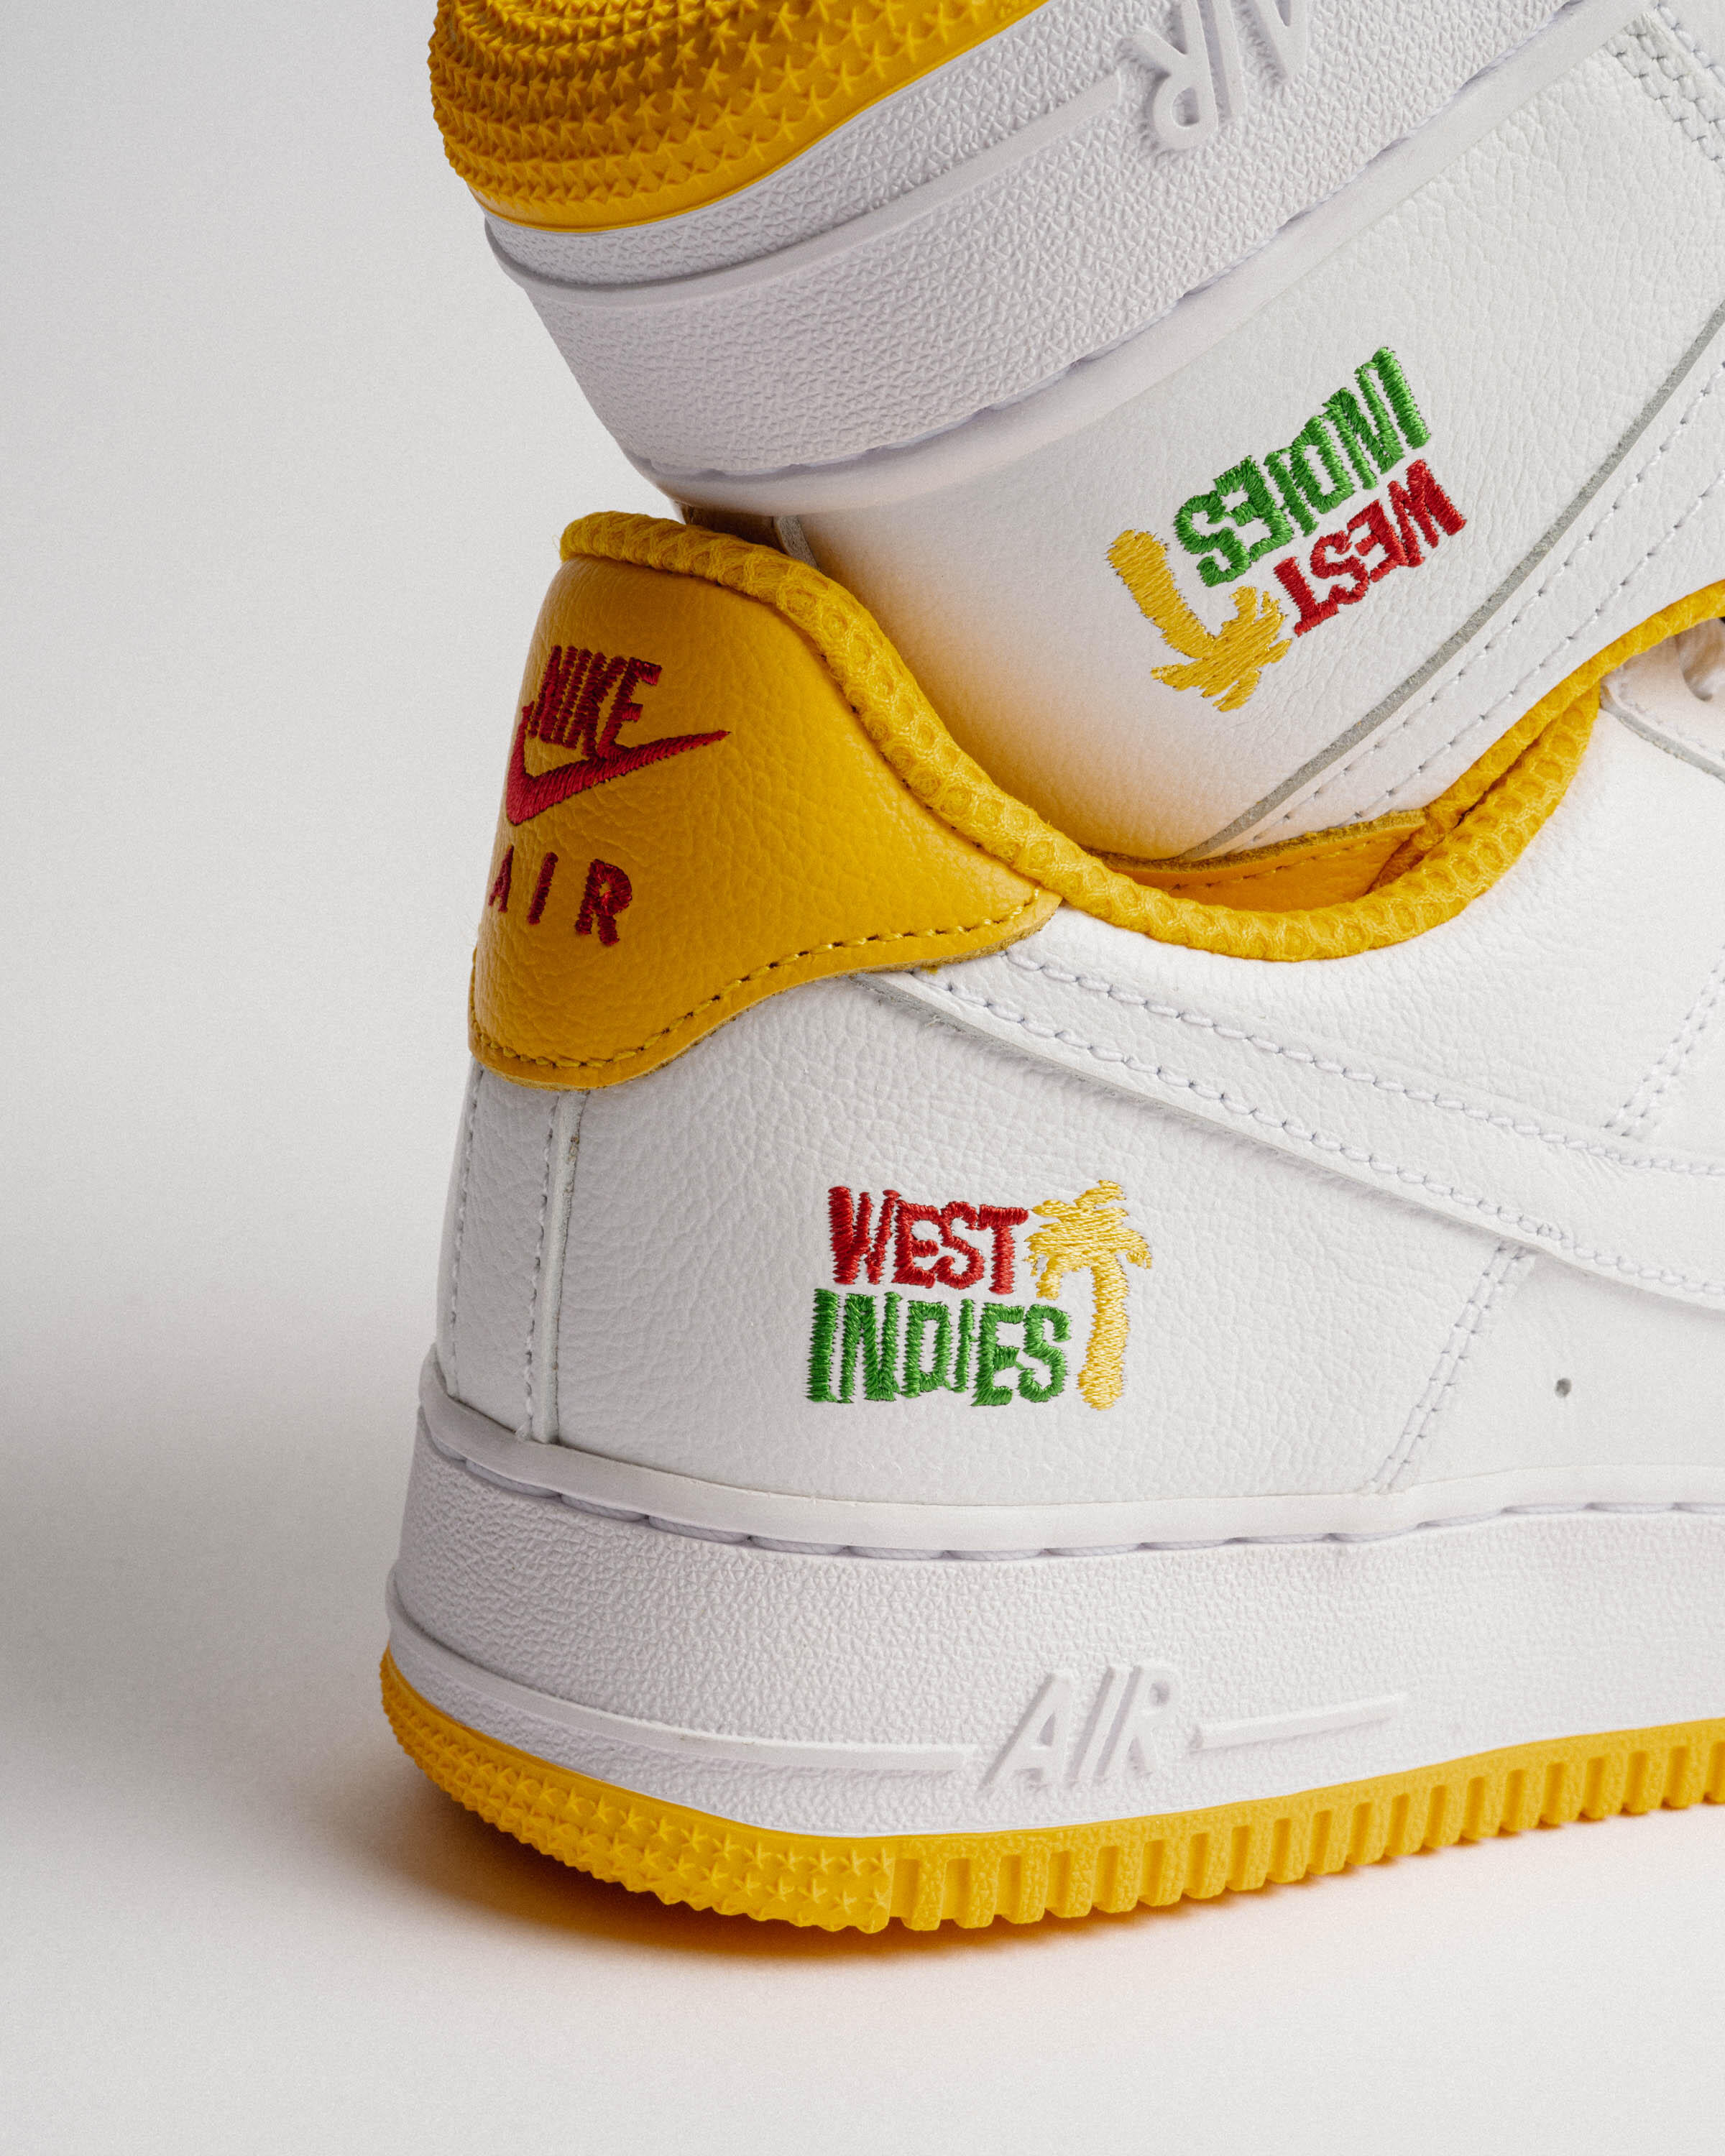 Nike AIR FORCE 1 LOW RETRO QS 'West Indies'